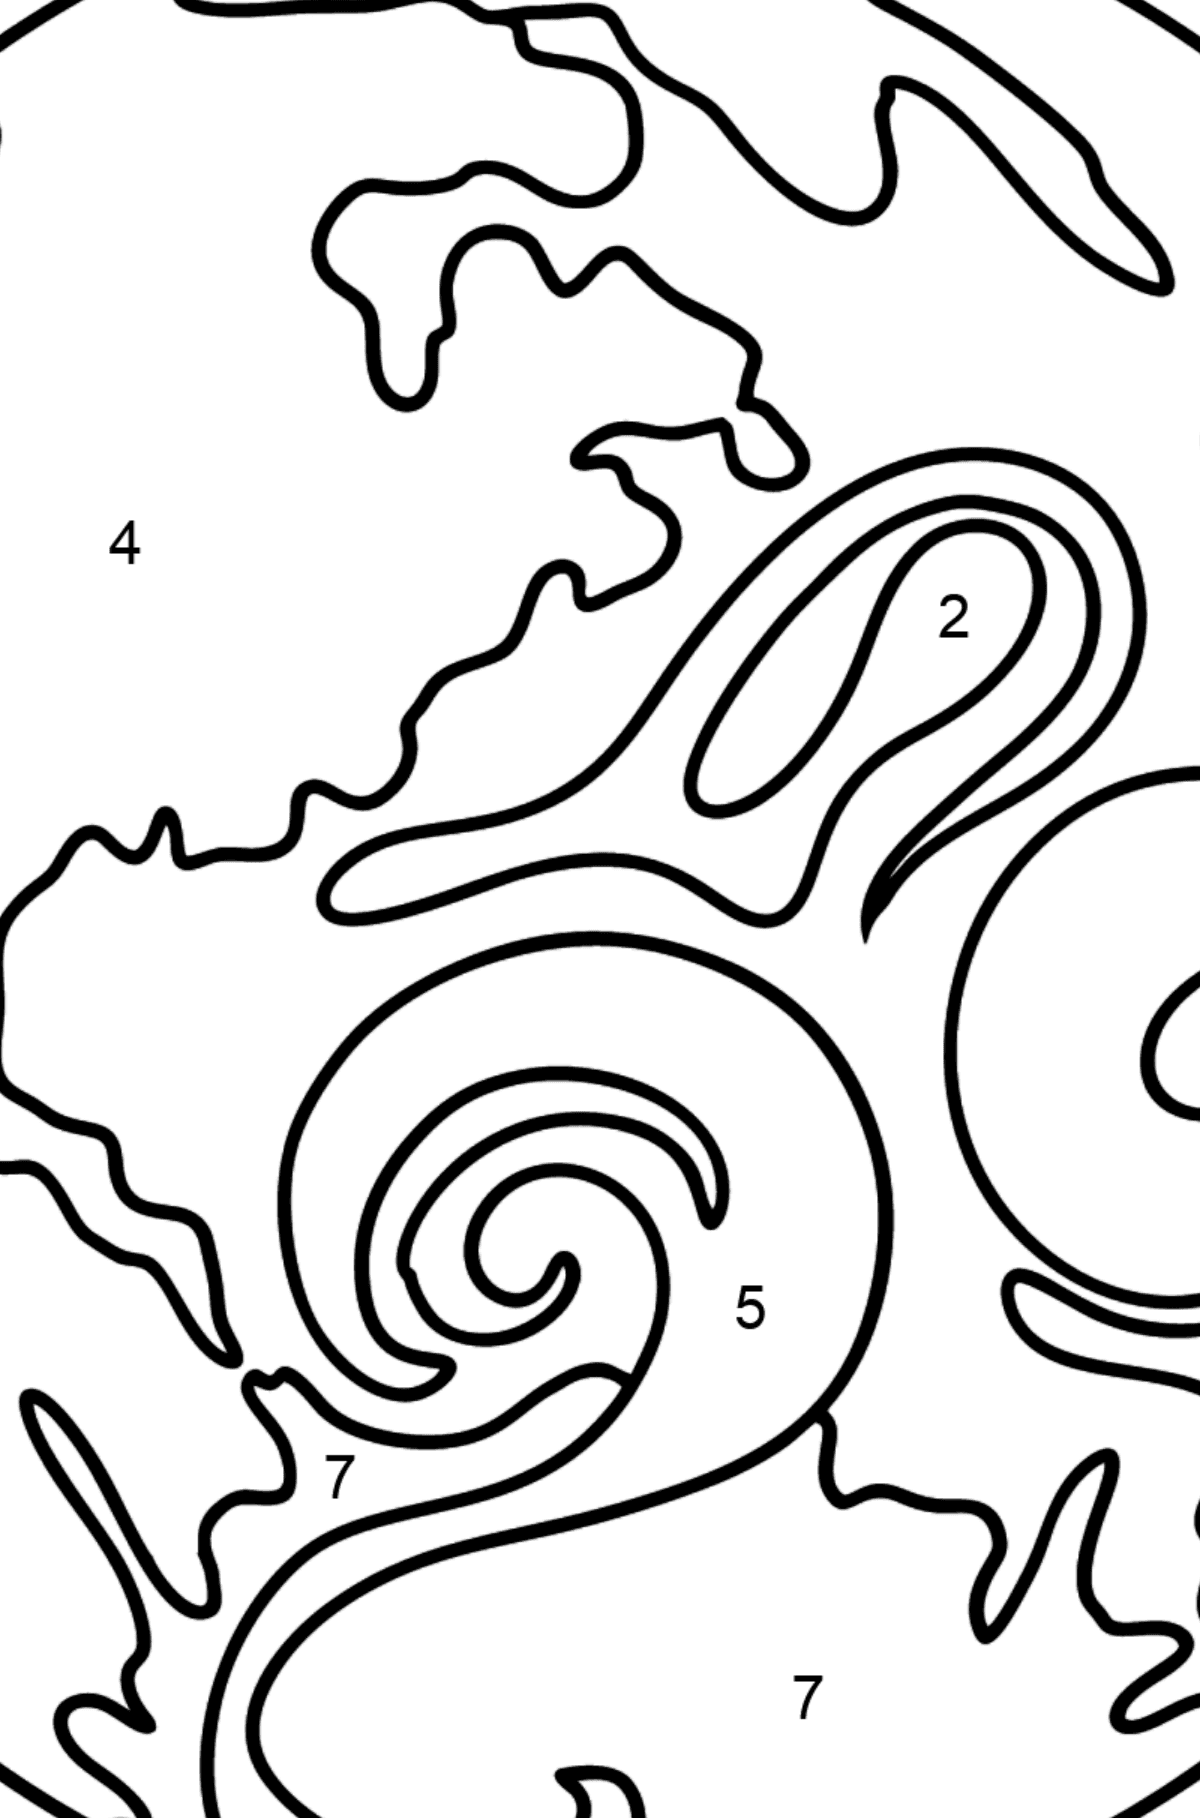 Planet Earth coloring page - Coloring by Numbers for Kids